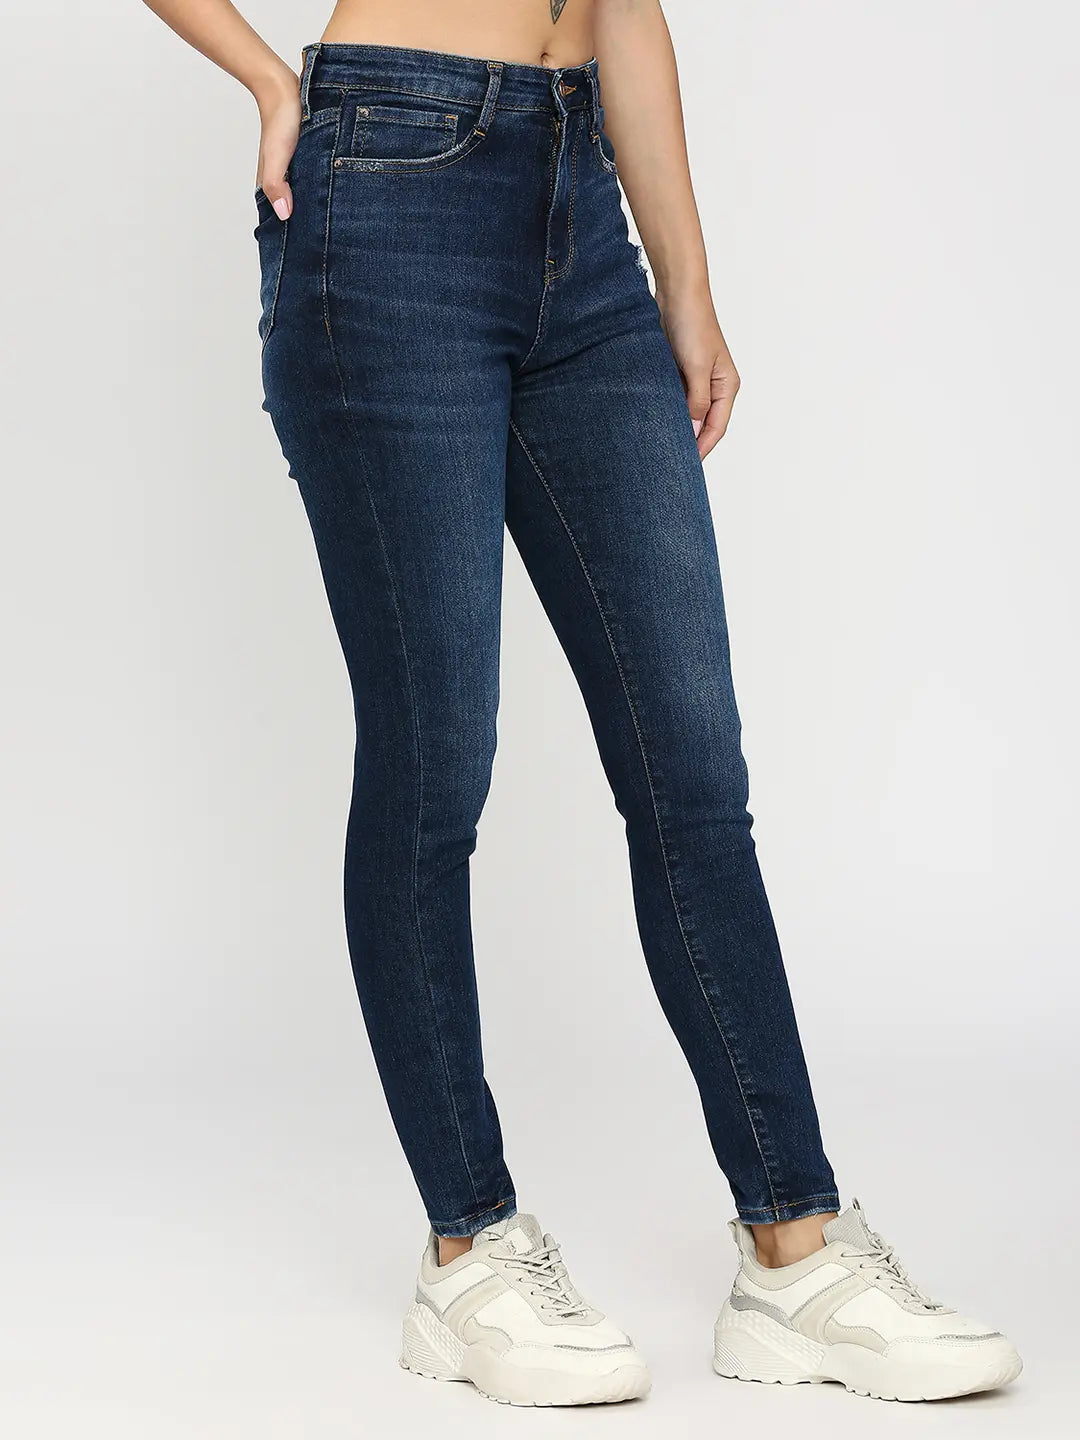 Update 103+ skin fit jeans for ladies best